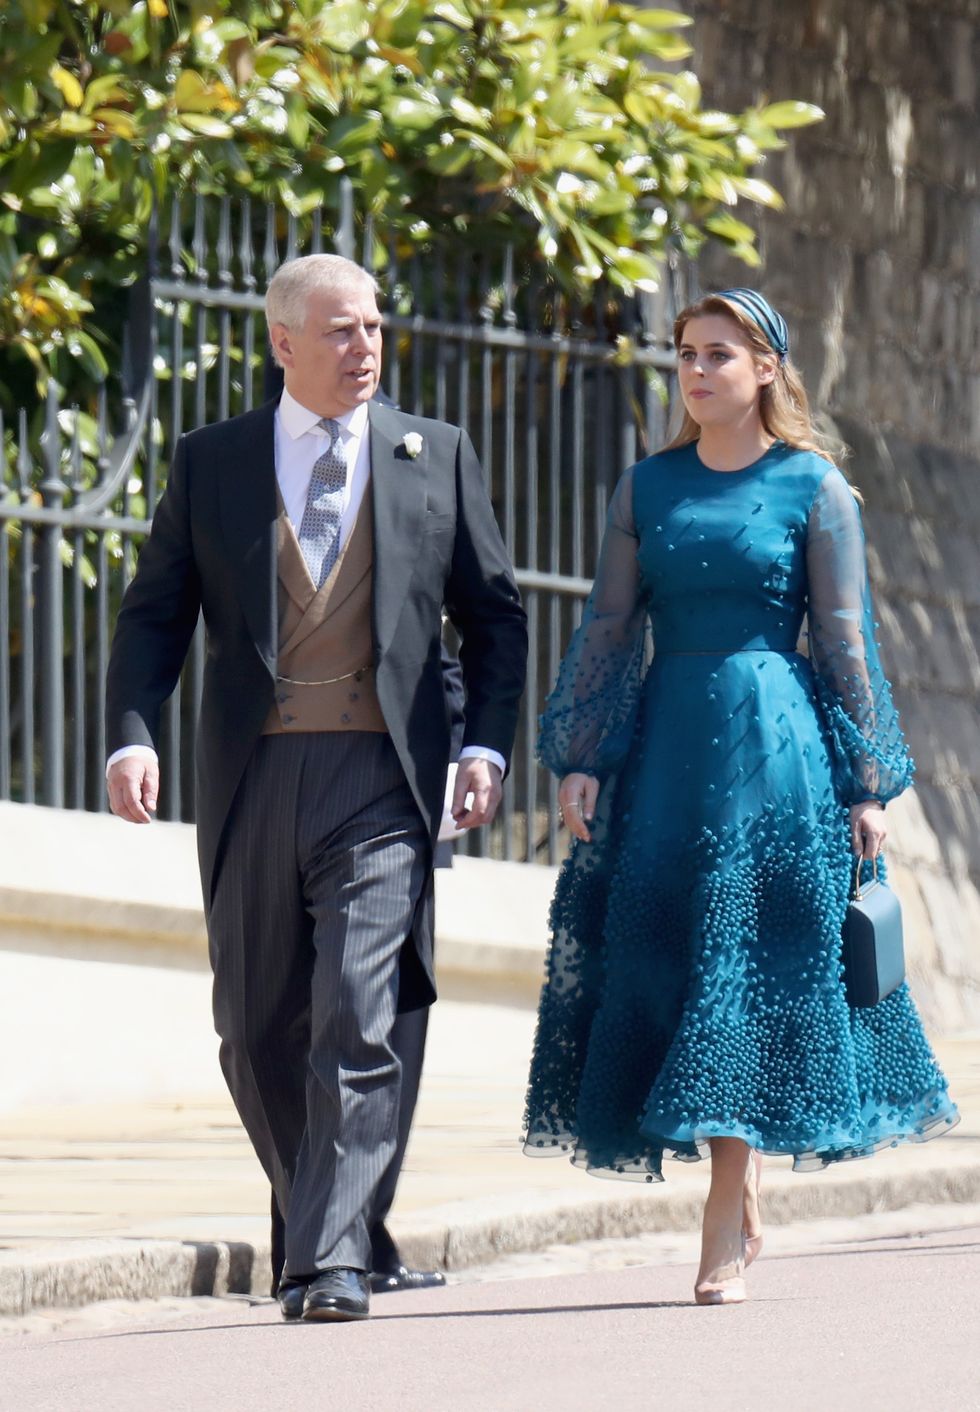 The Duke of York and Princess Beatrice attended the wedding of Meghan Markle and Prince Harry.